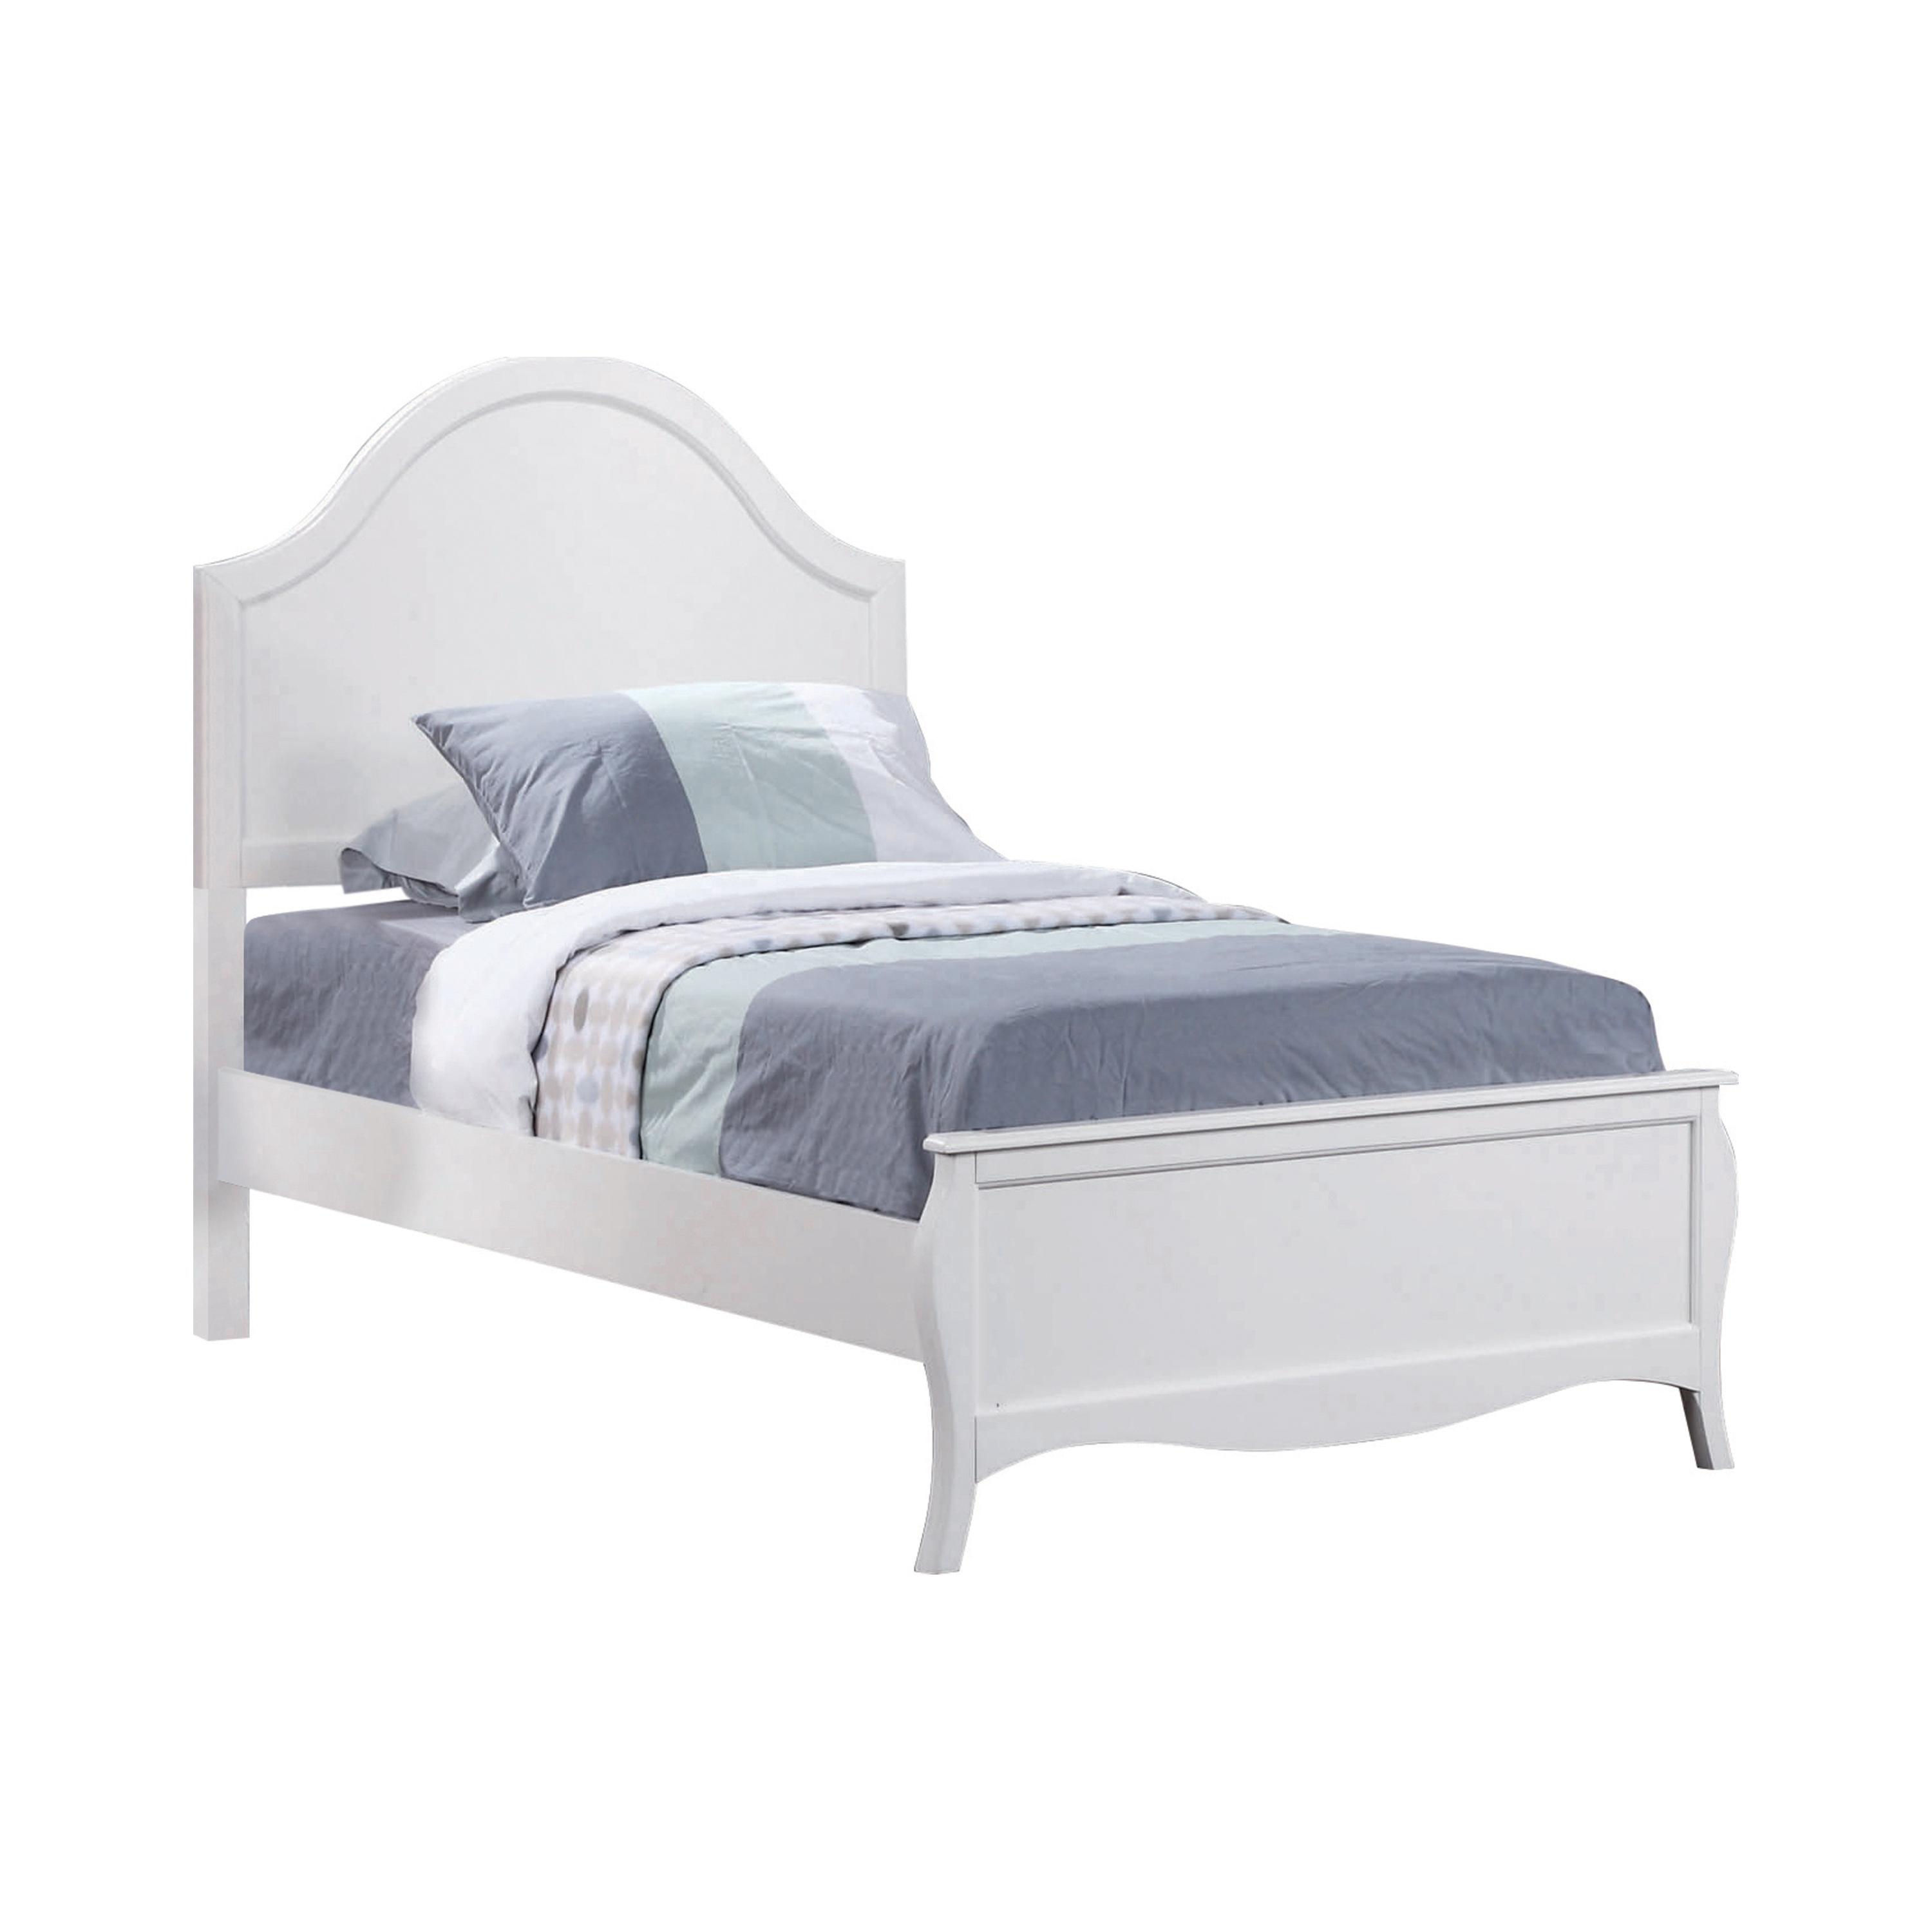 Traditional Bed 400561T Dominique 400561T in White 